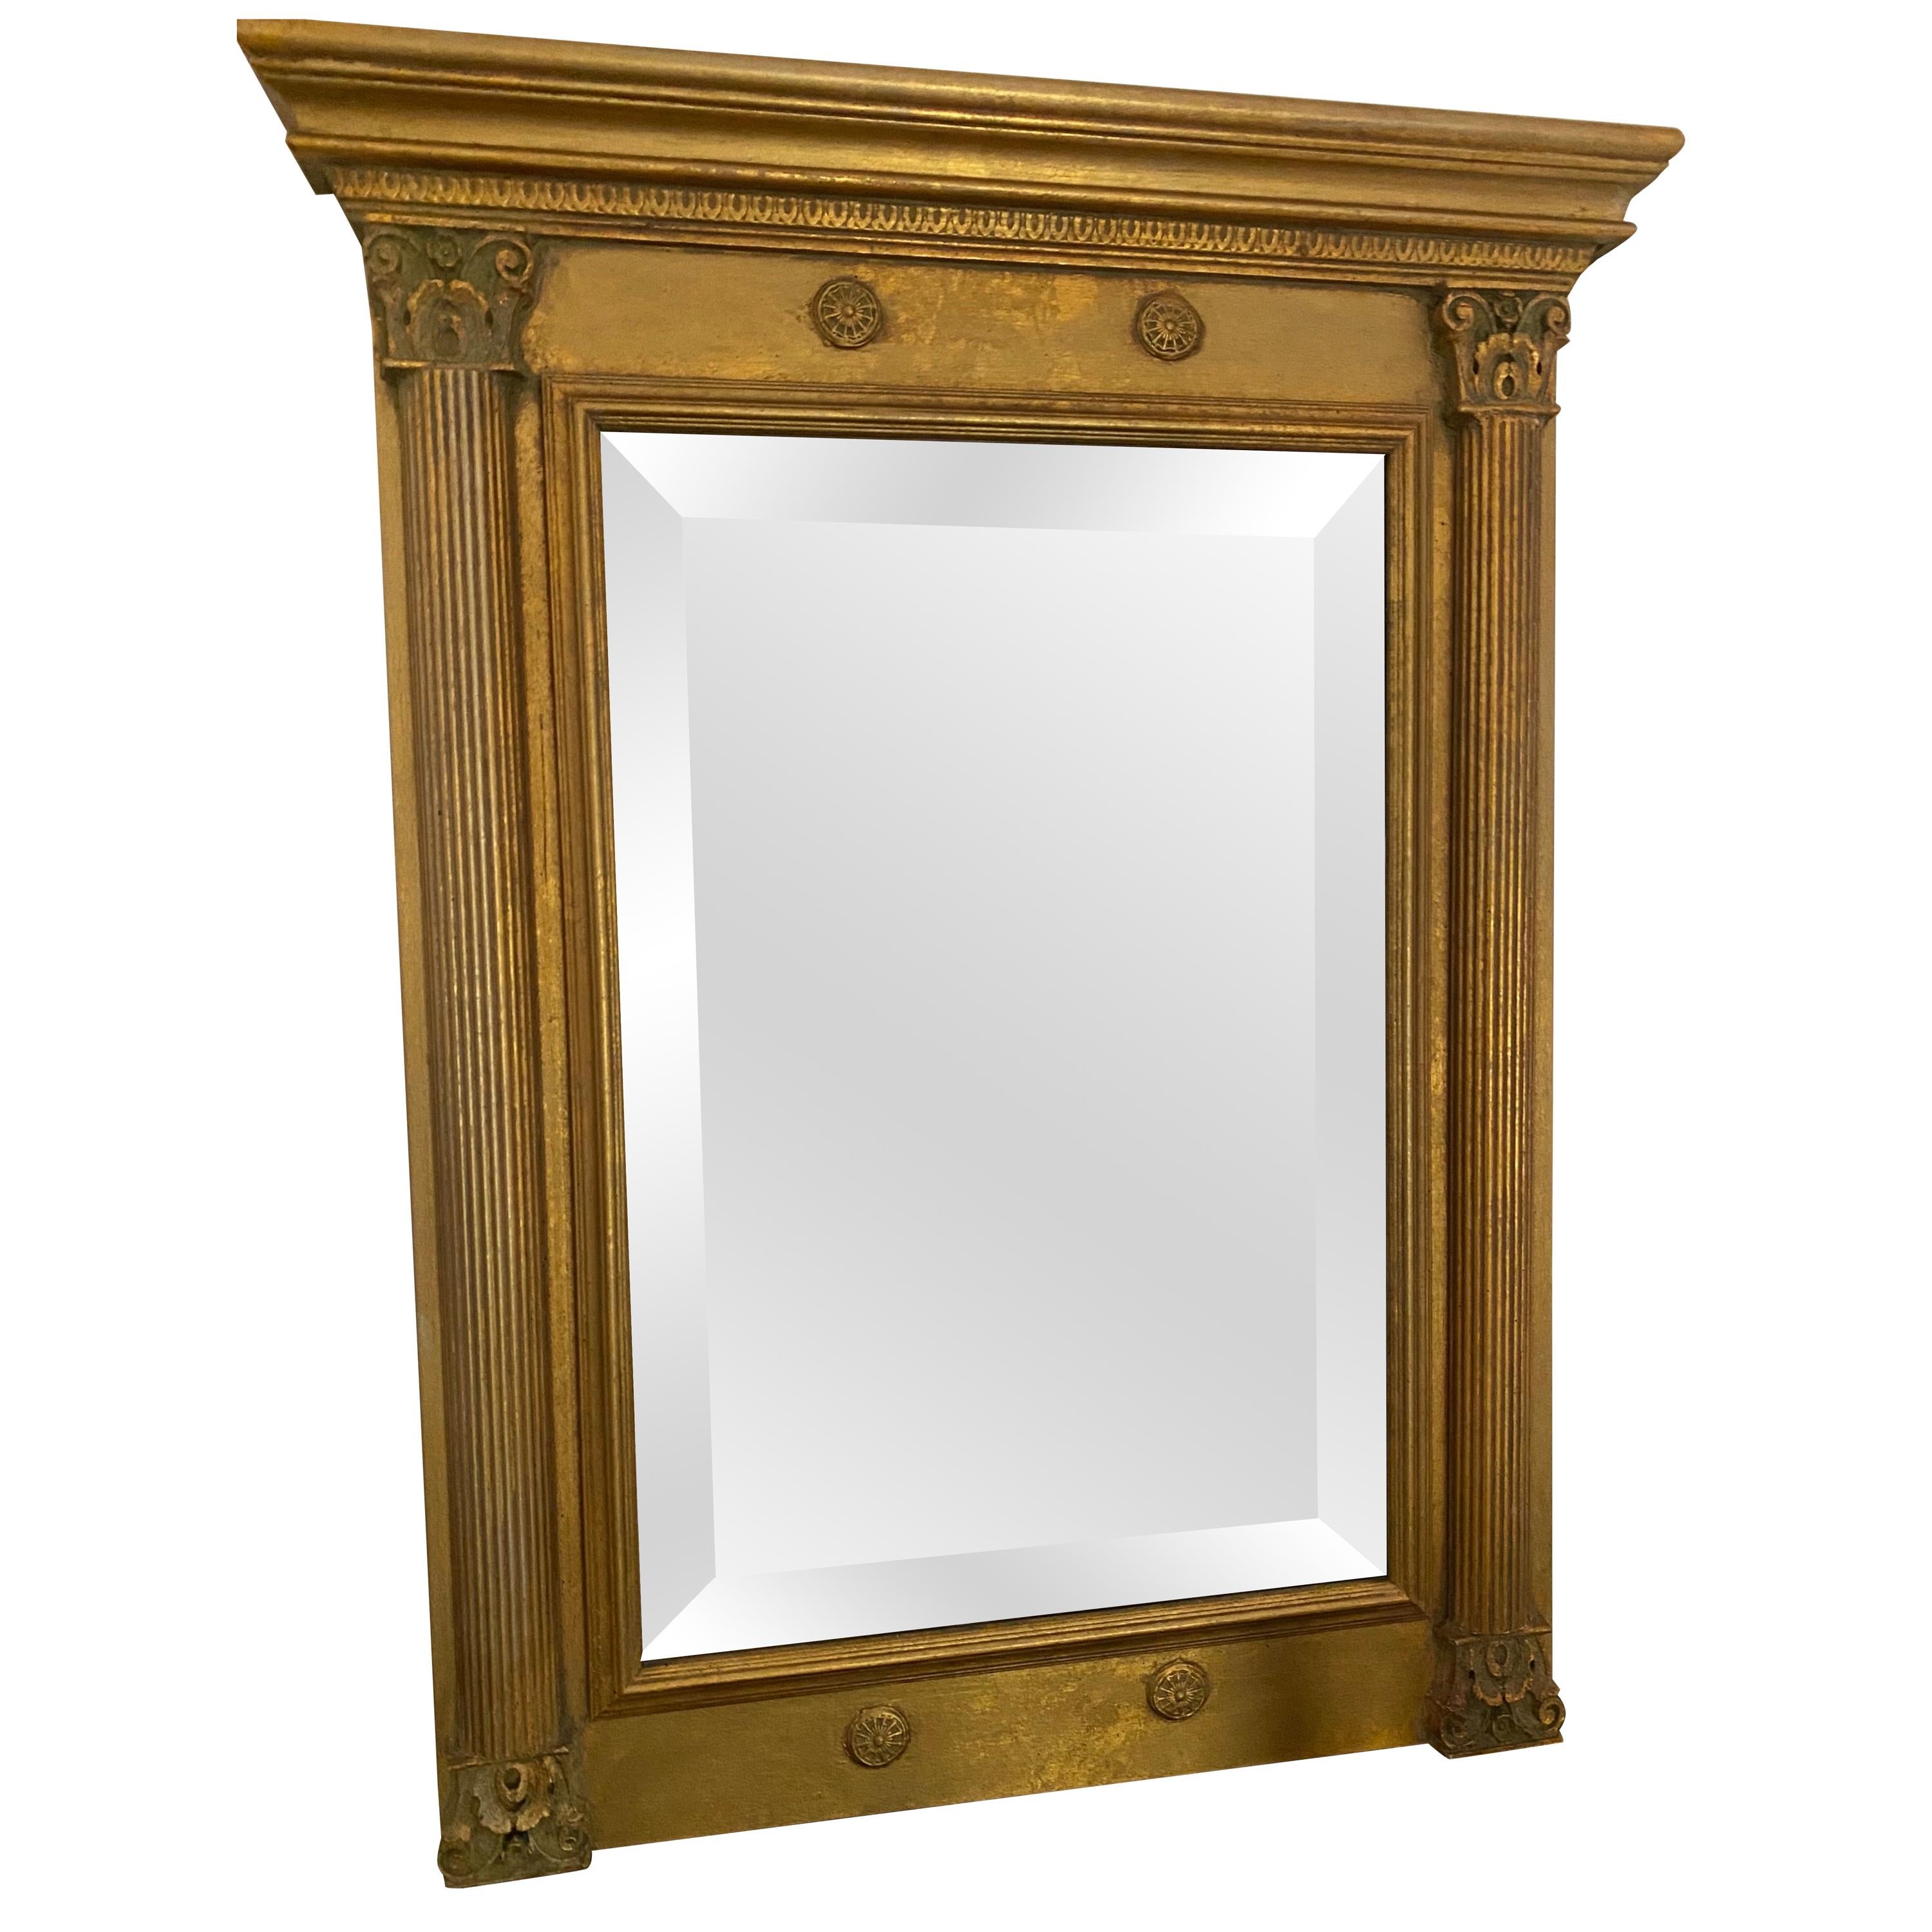 Neoclassical Revival Style Gold Gilt Frame Mirror For Sale